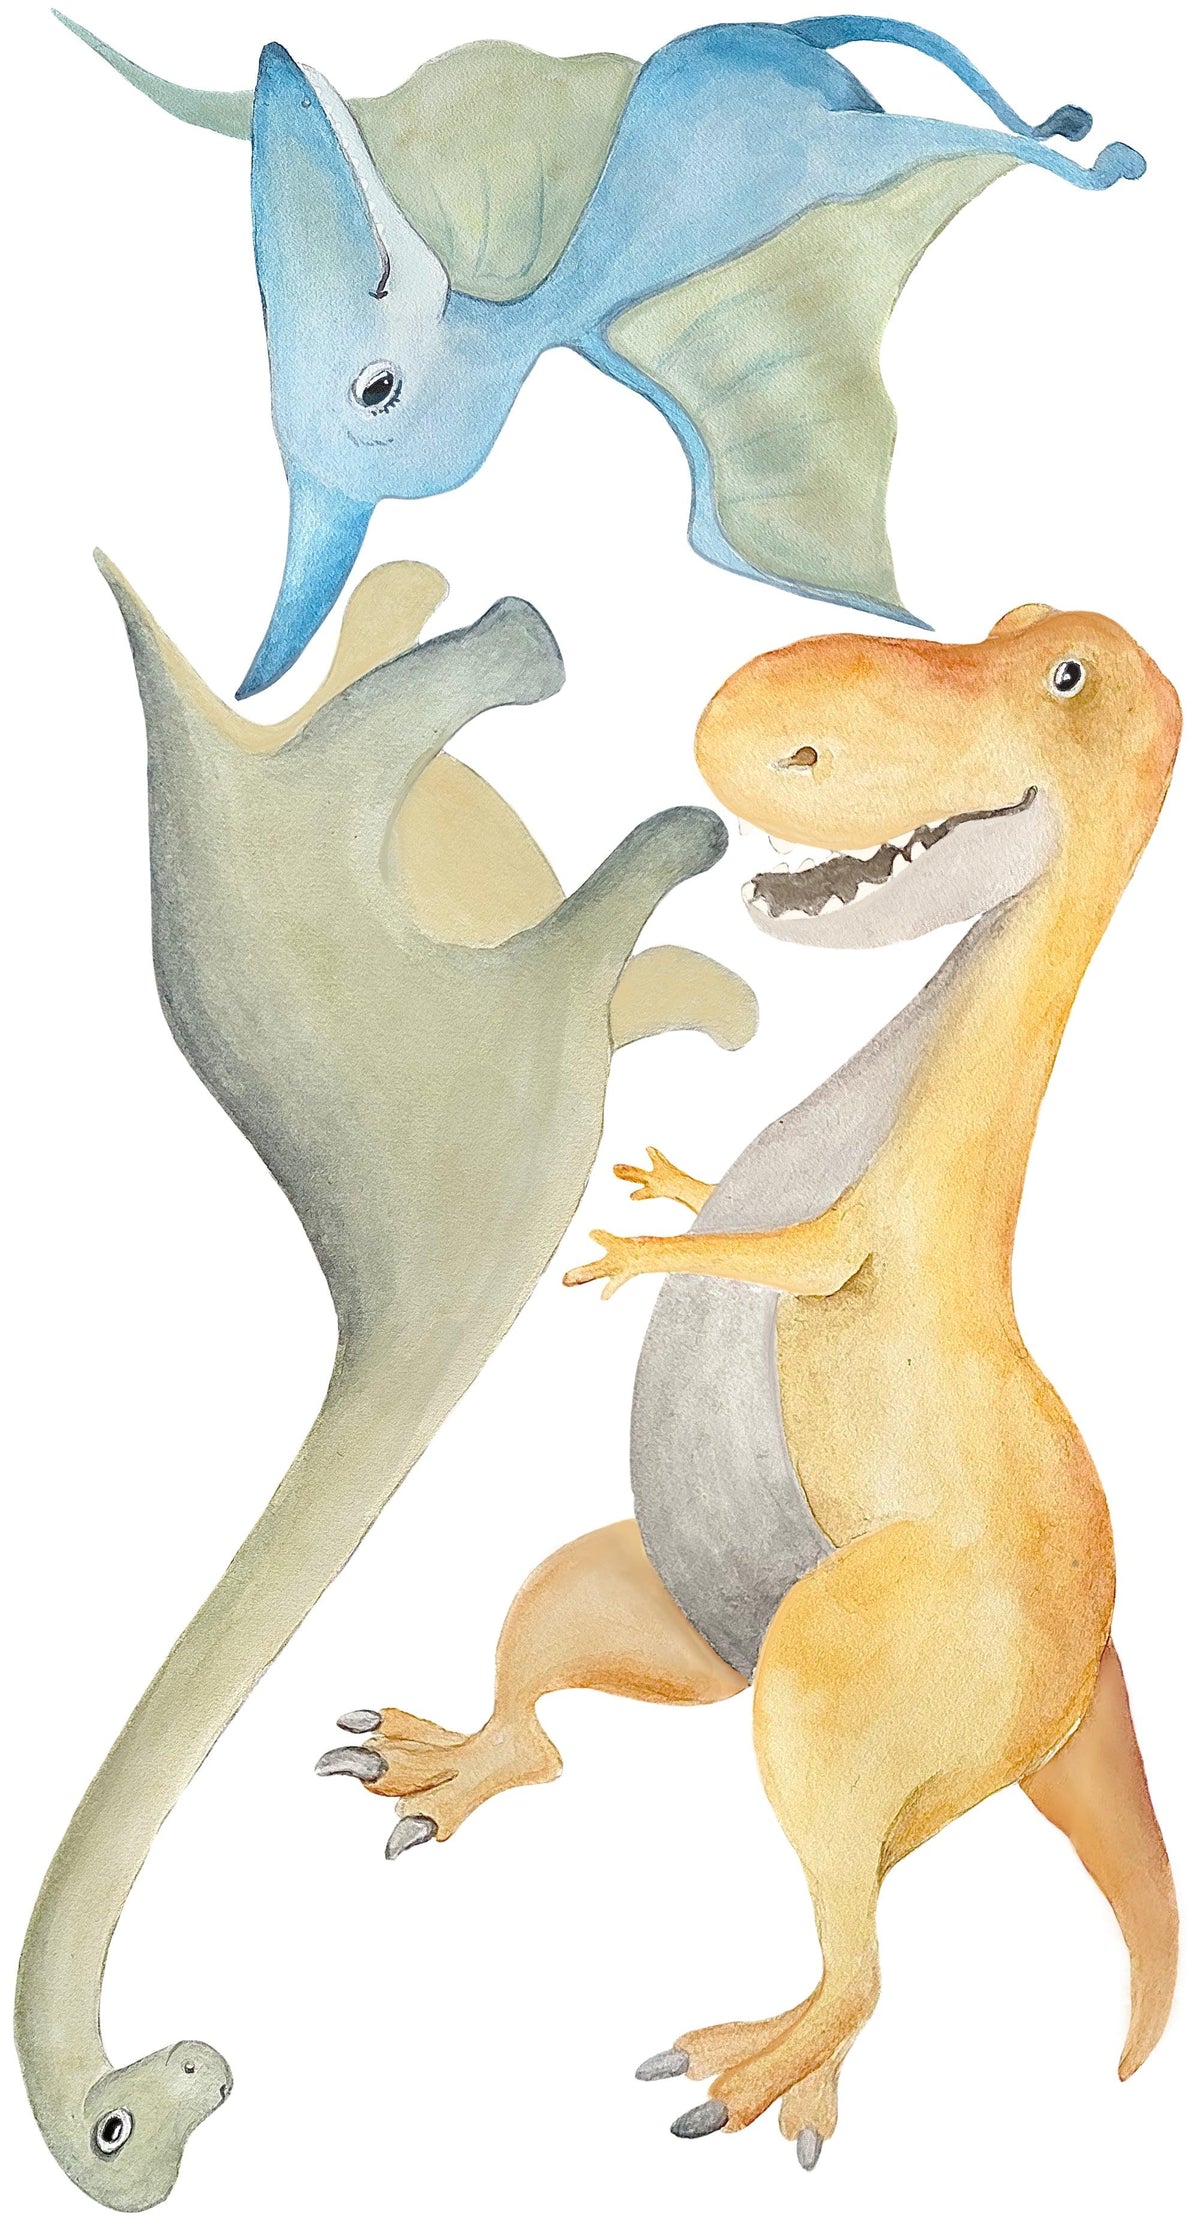 Dino Pals - Removable Fabric Wall Stickers For Your Dino Explorer - lovefrankieart